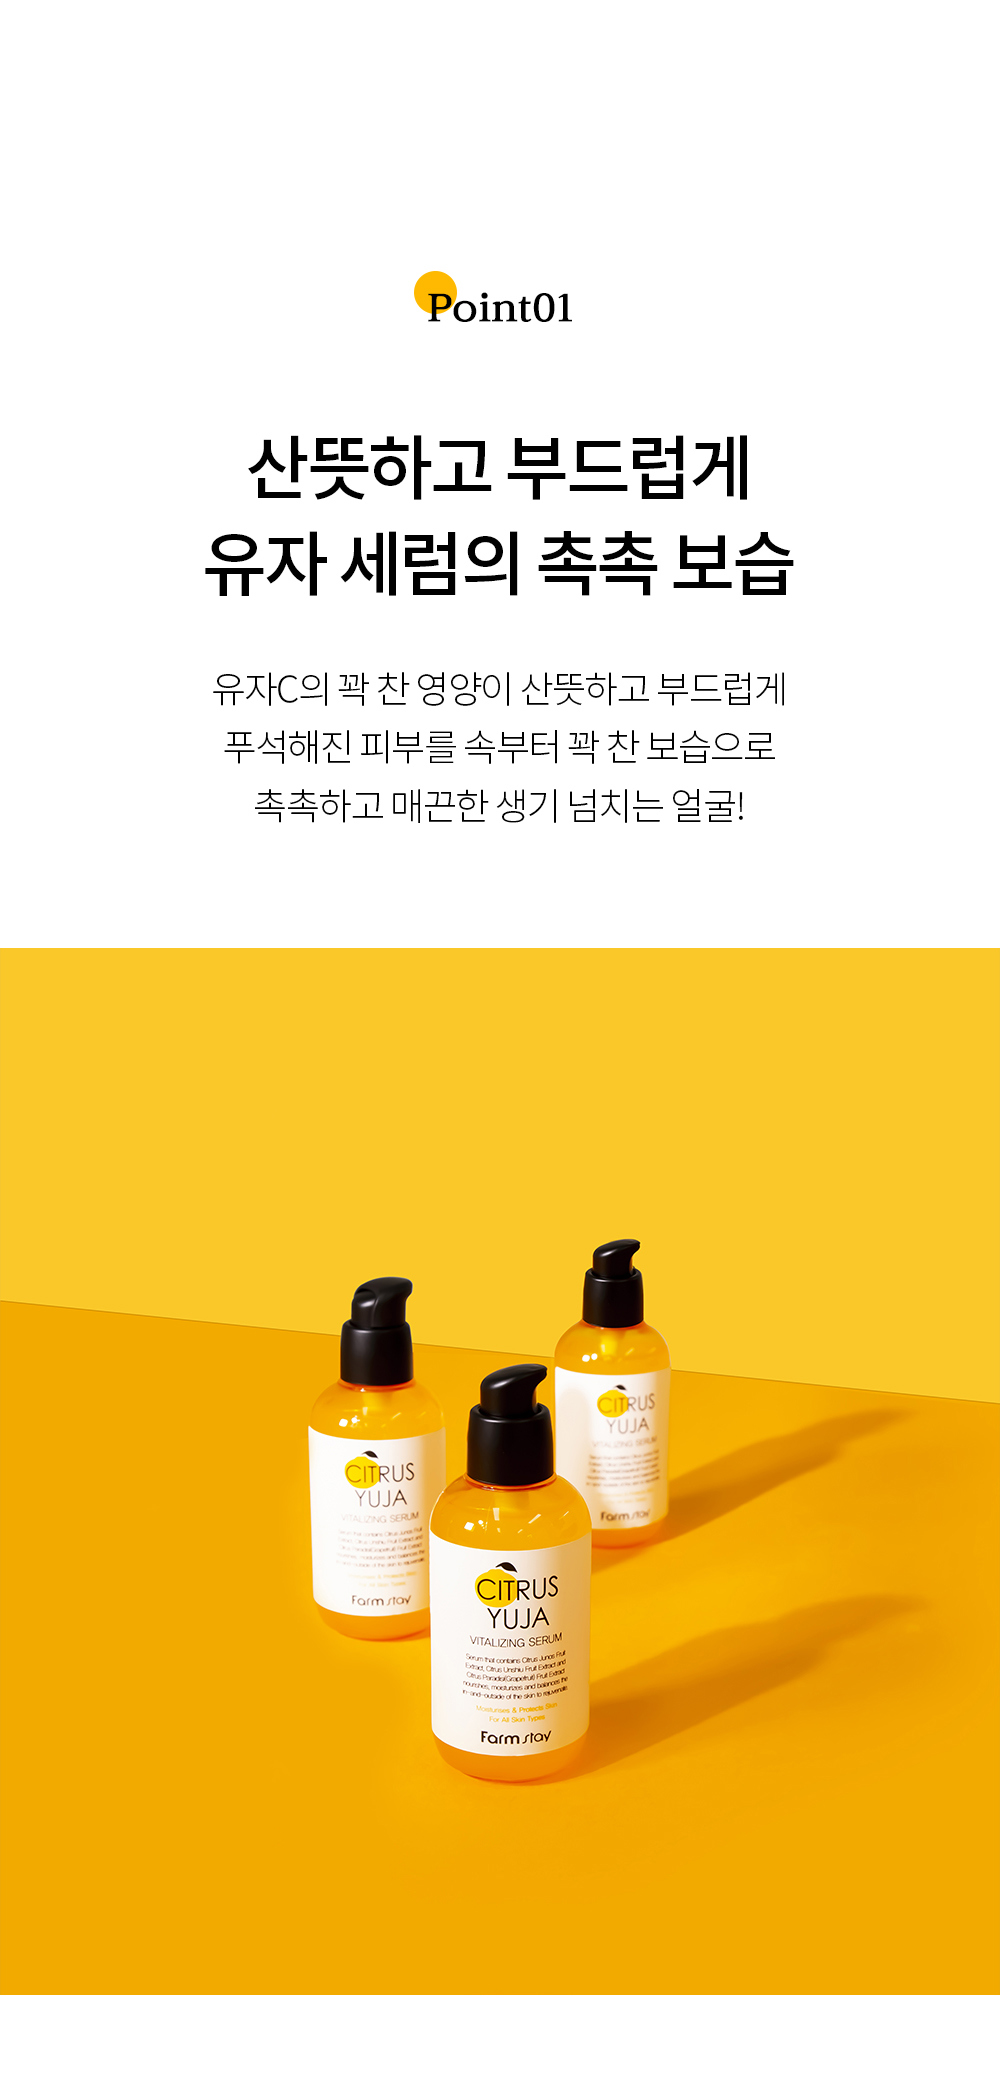 cosmetics yellow color image-S1L6